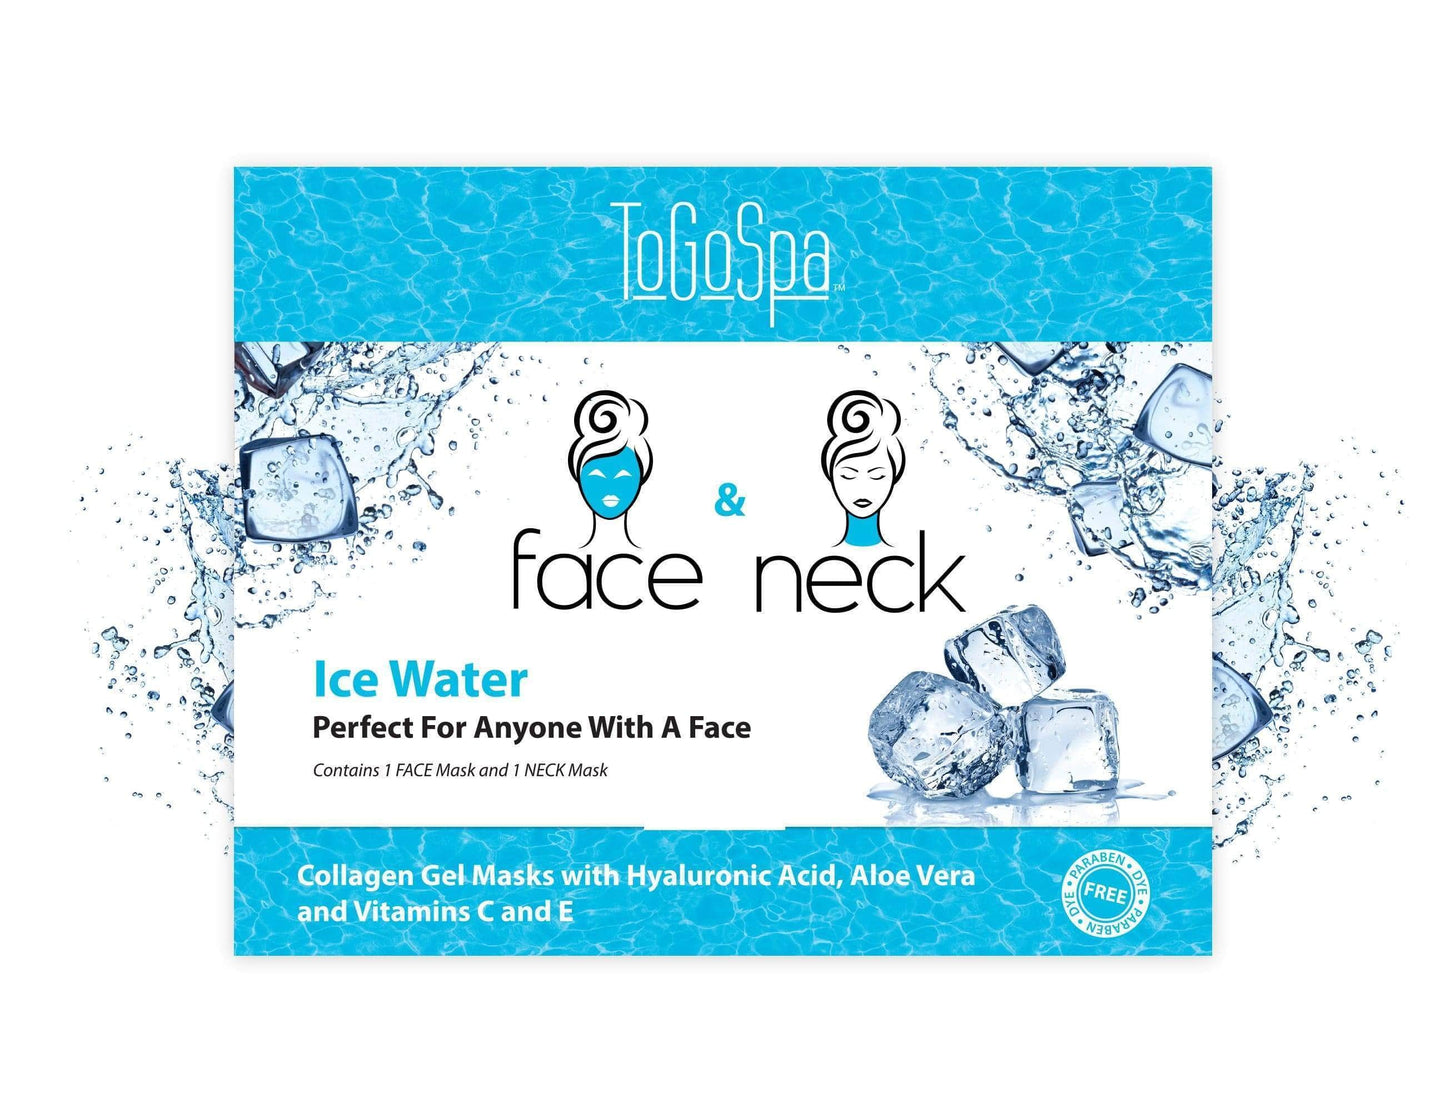 FACE & NECK Combo Pack